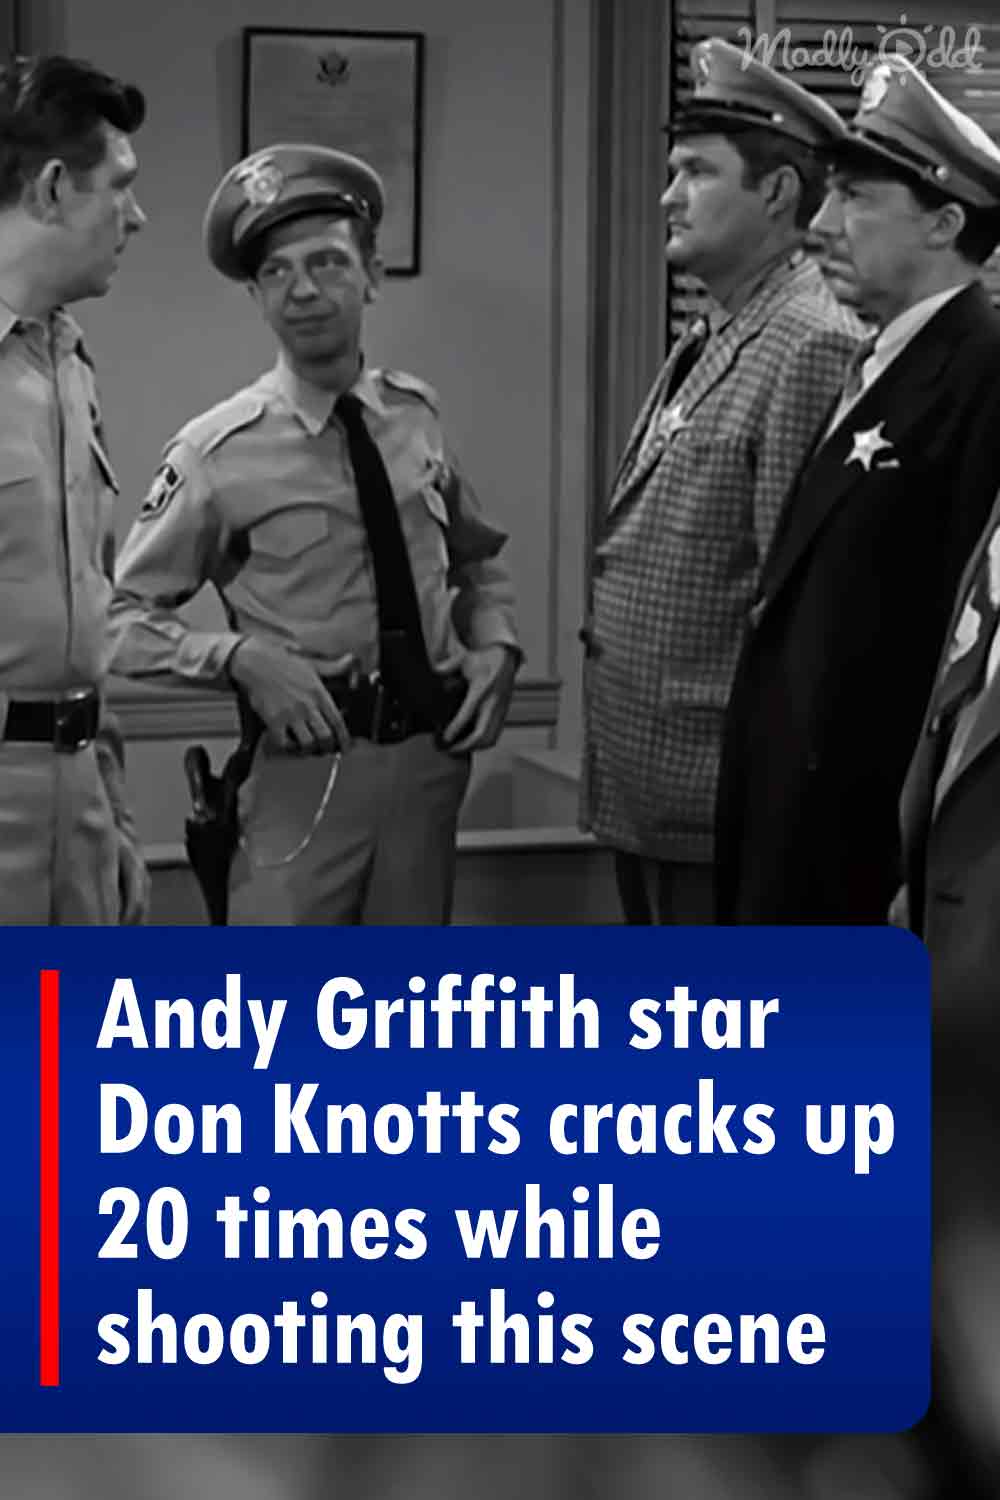 Andy Griffith star Don Knotts cracks up 20 times while shooting this scene